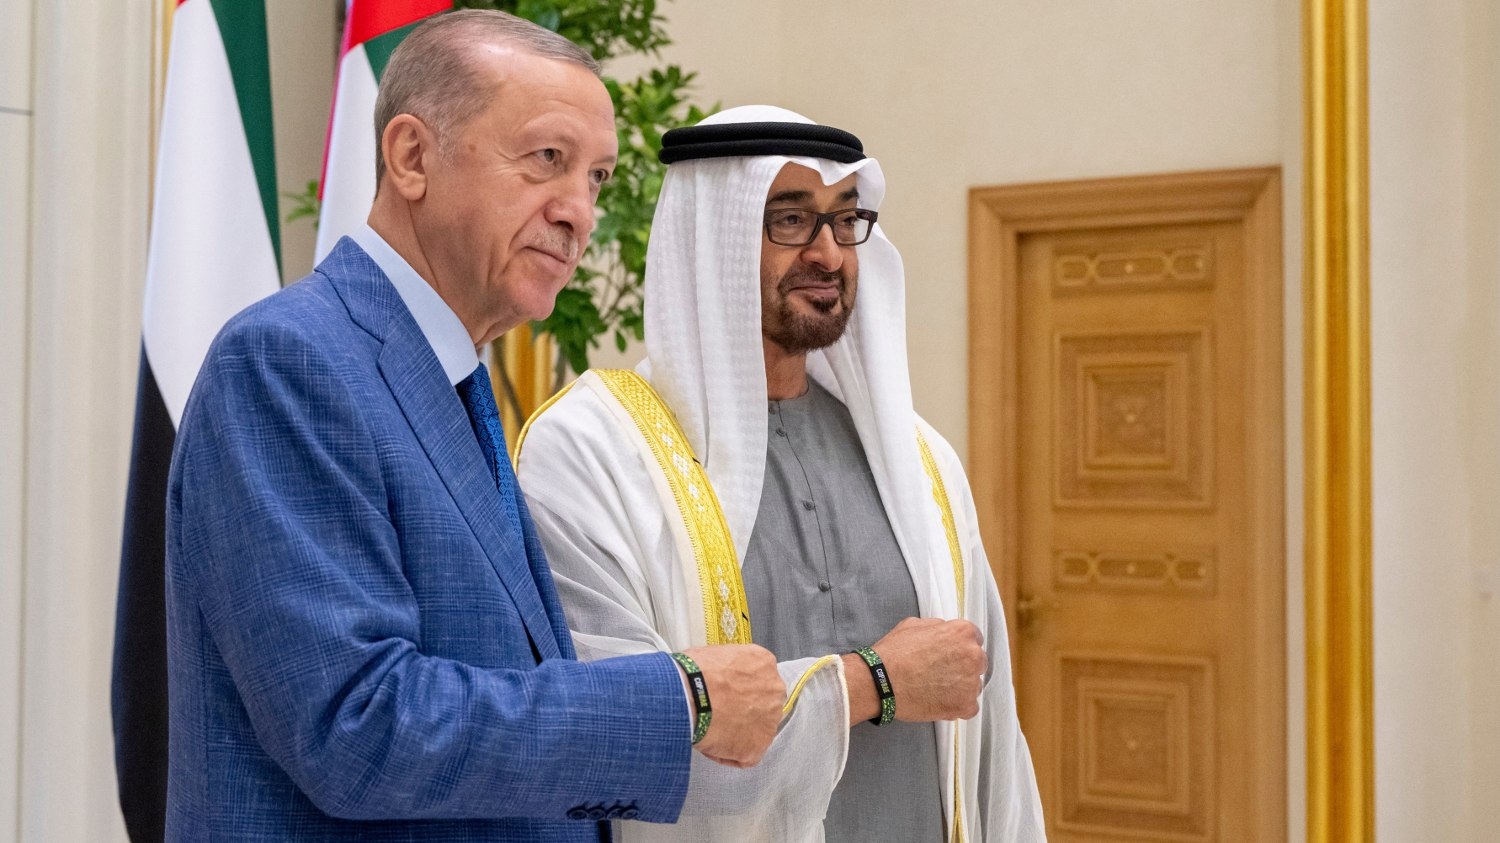 UAE President Mohamed bin Zayed and his Turkish counterpart Recep Tayyip Erdogan stand for a photograph during an official reception in Abu Dhabi on 19 July 2023.